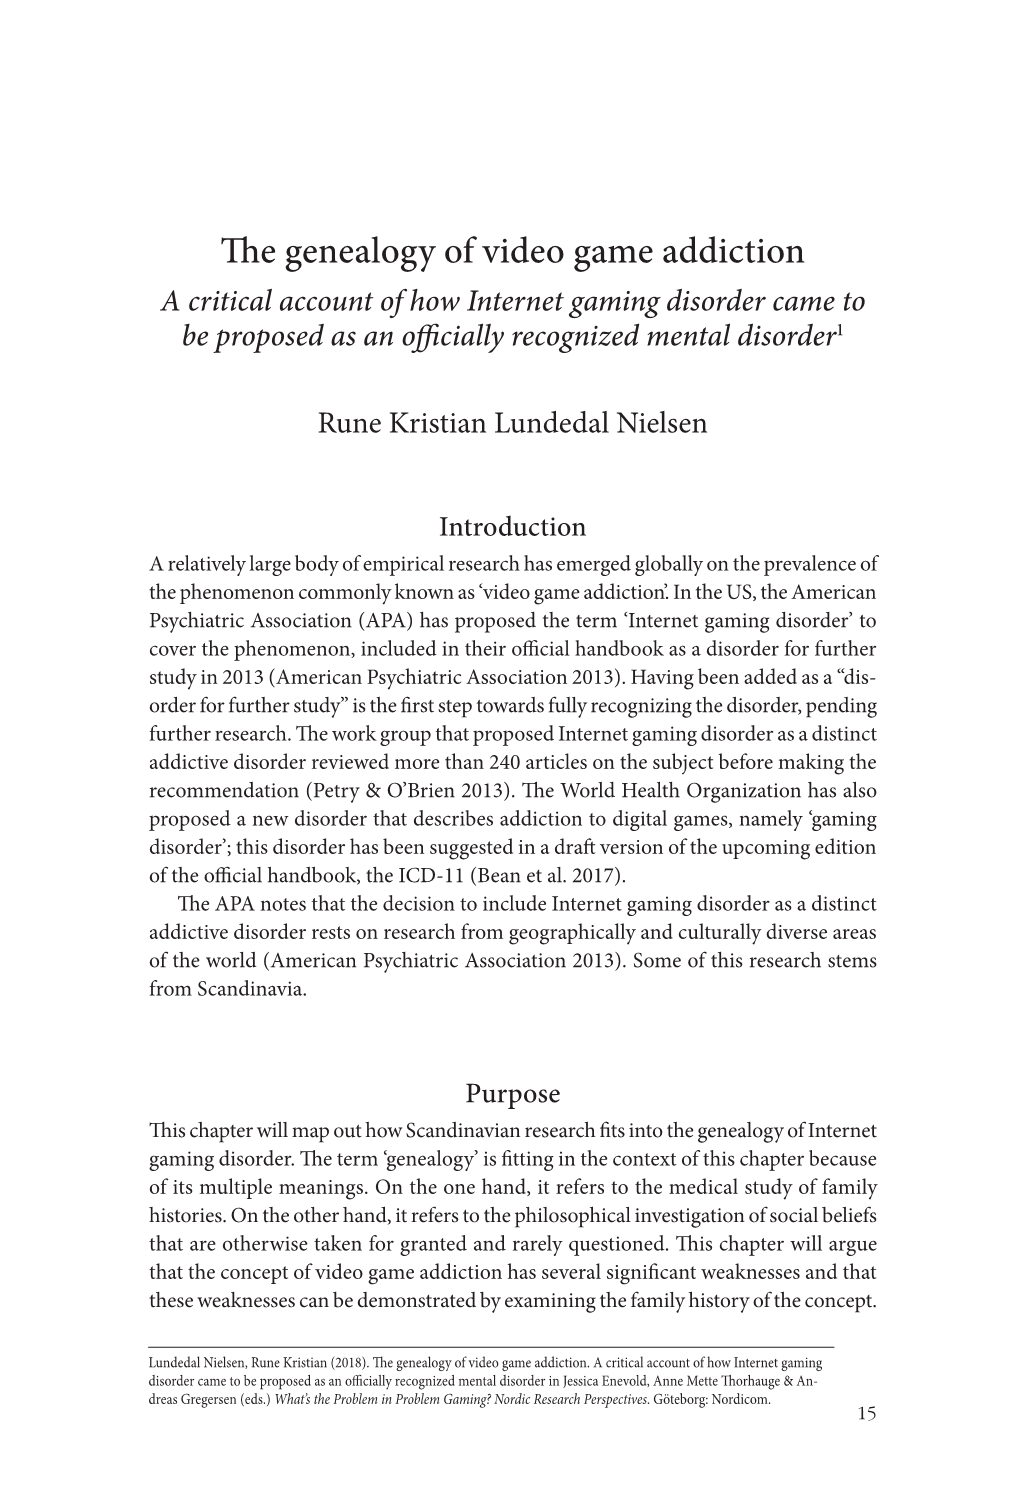 The Genealogy of Video Game Addiction a Critical Account of How Internet Gaming Disorder Came to Be Proposed As an Officially Recognized Mental Disorder1